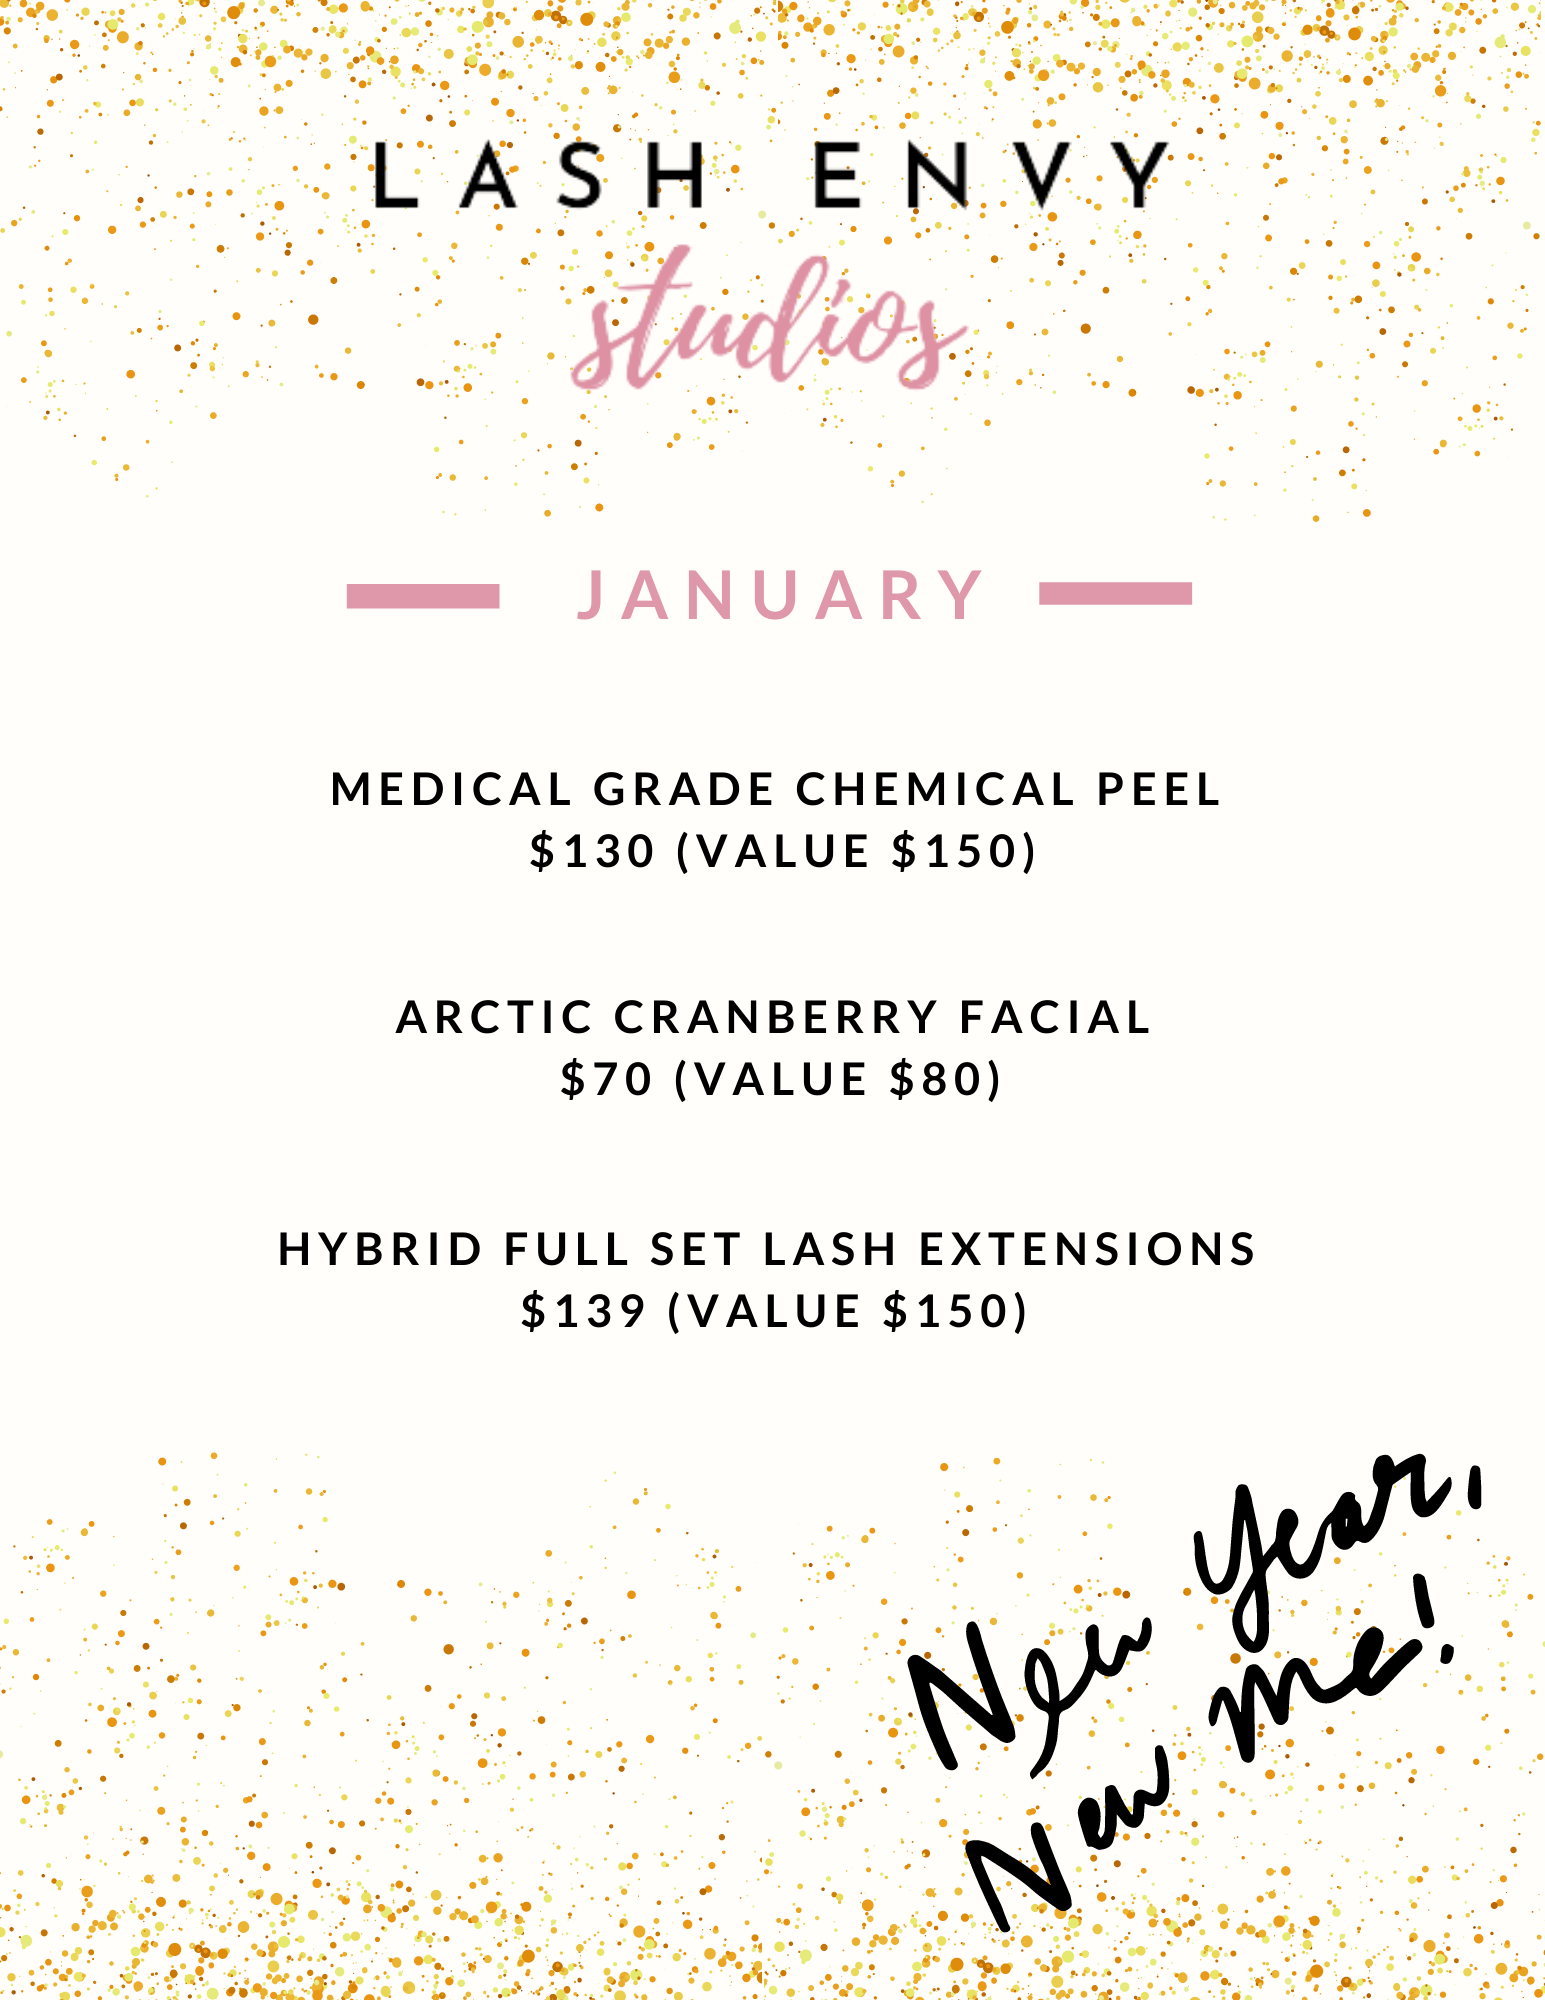 December Specials banner 20% off microblading and dermaplane facial for $99 ($120 value)